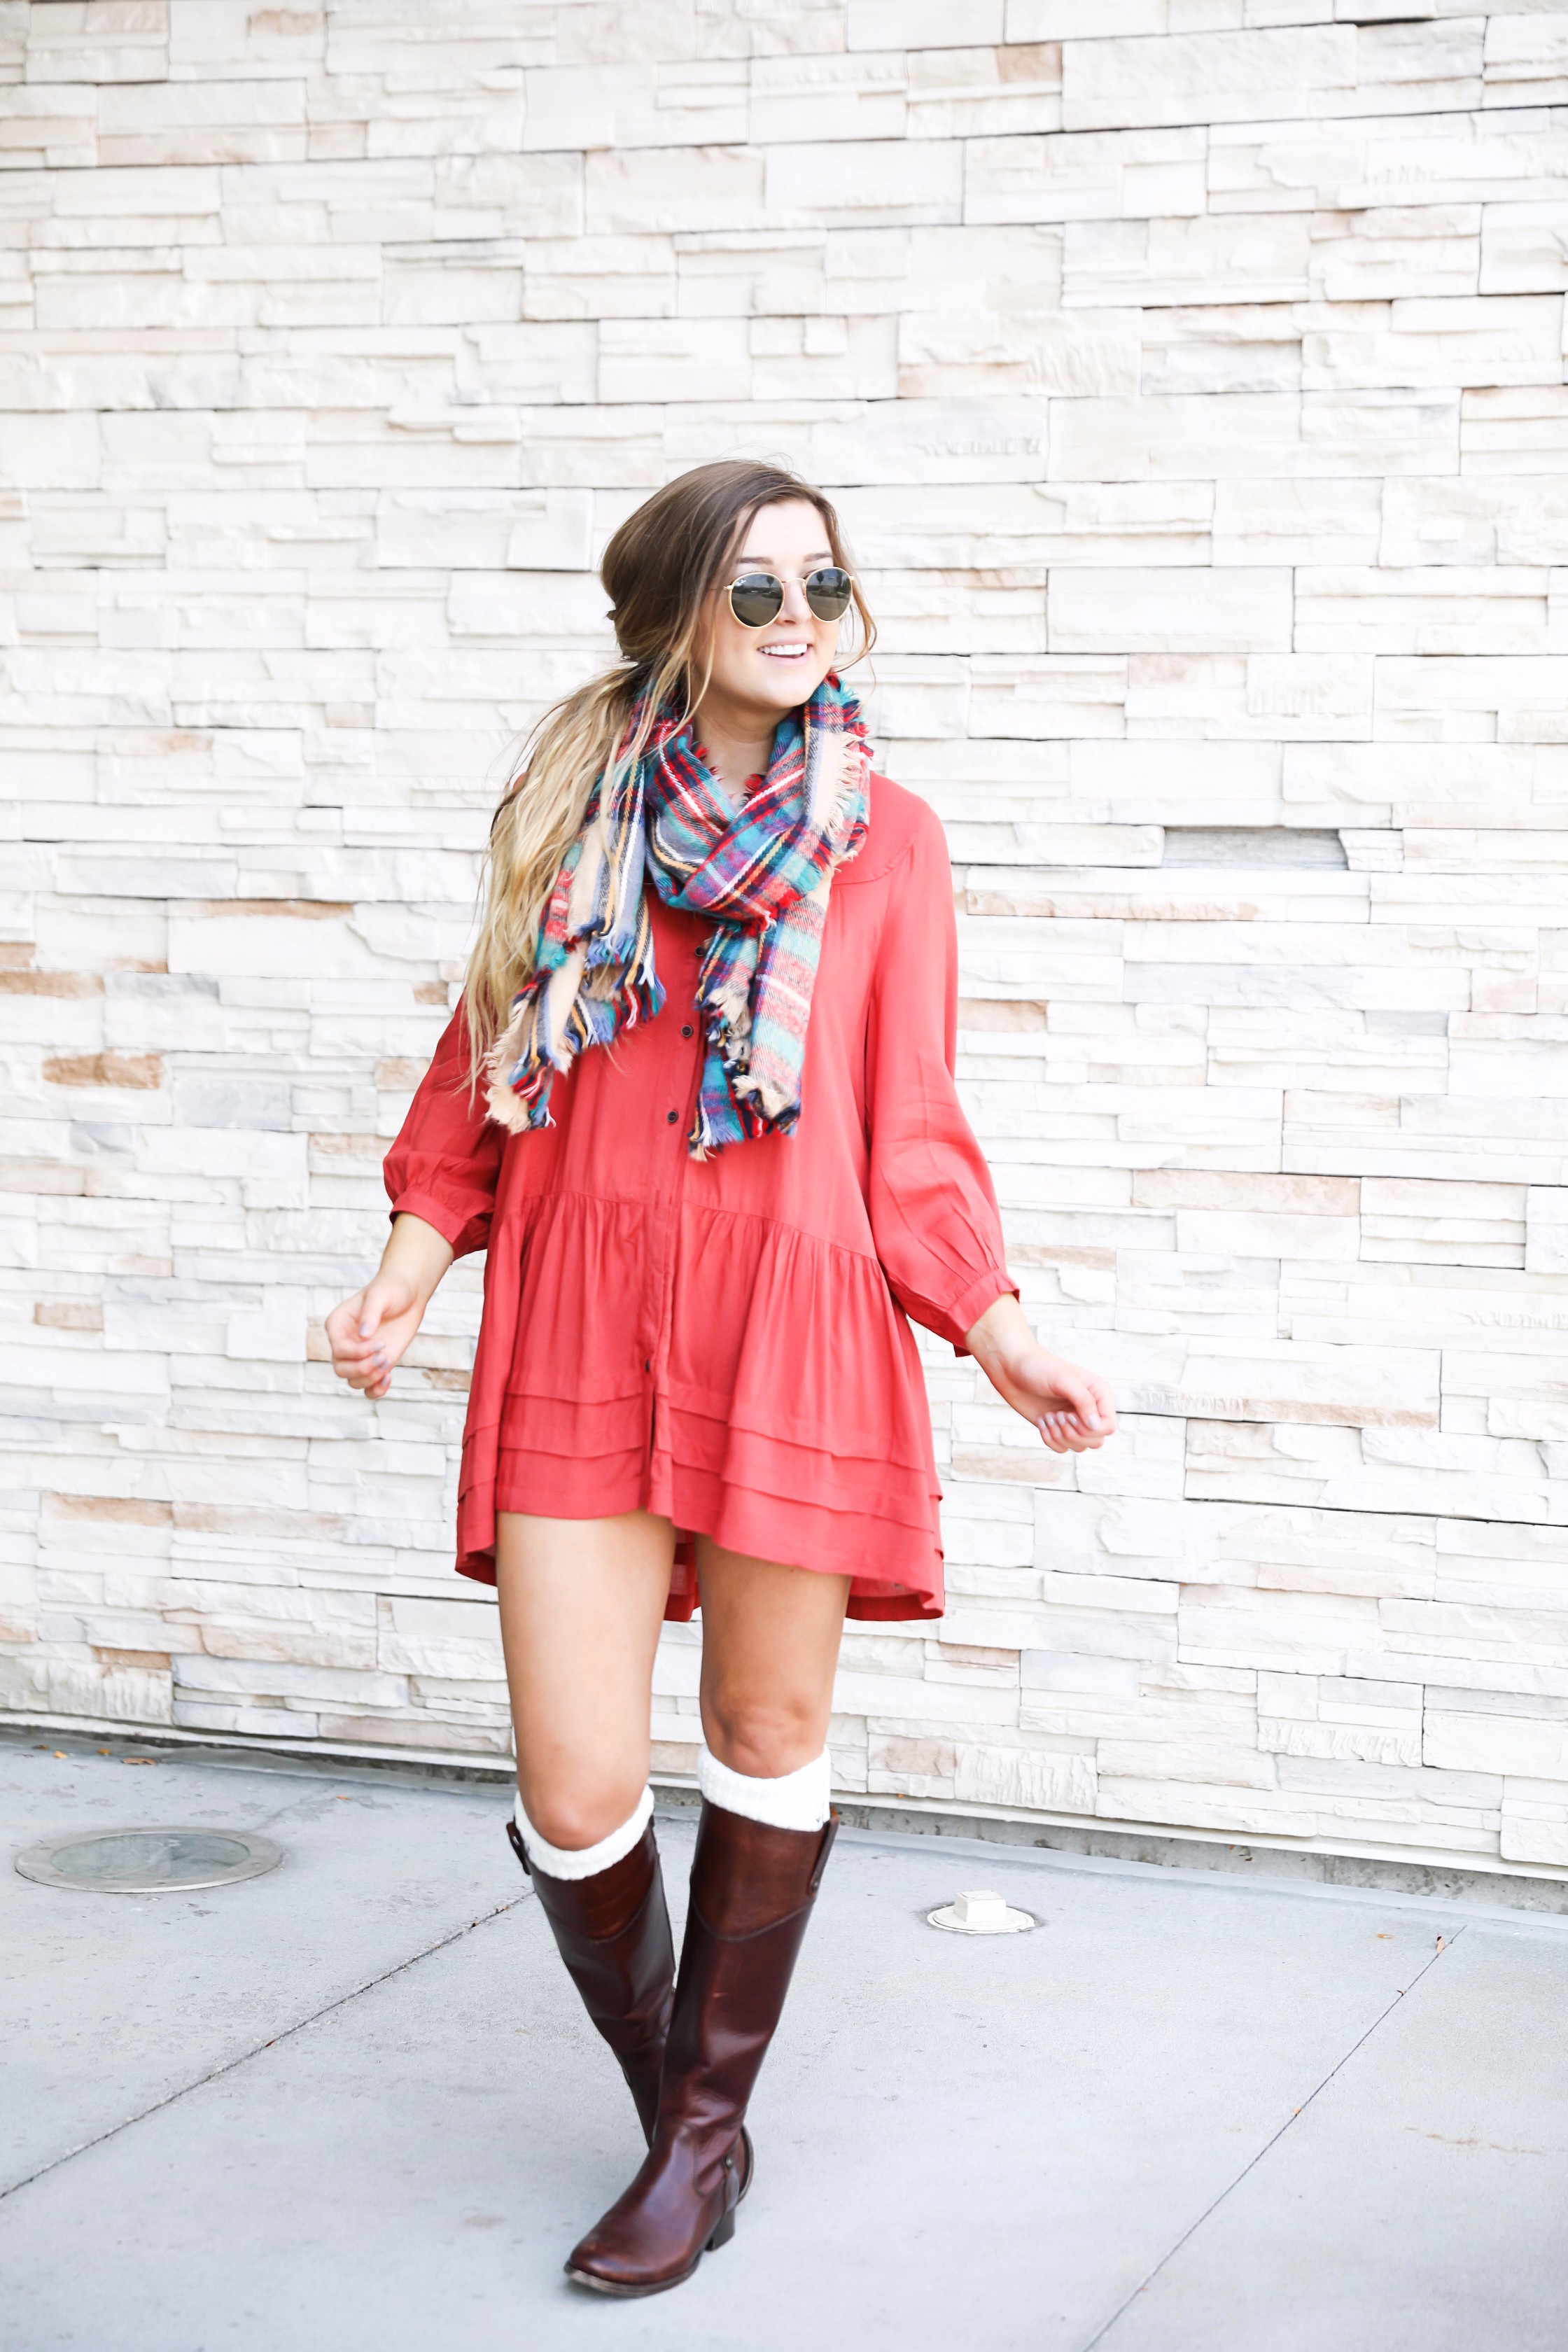 How To Wear Sock Booties & Fall Outfits